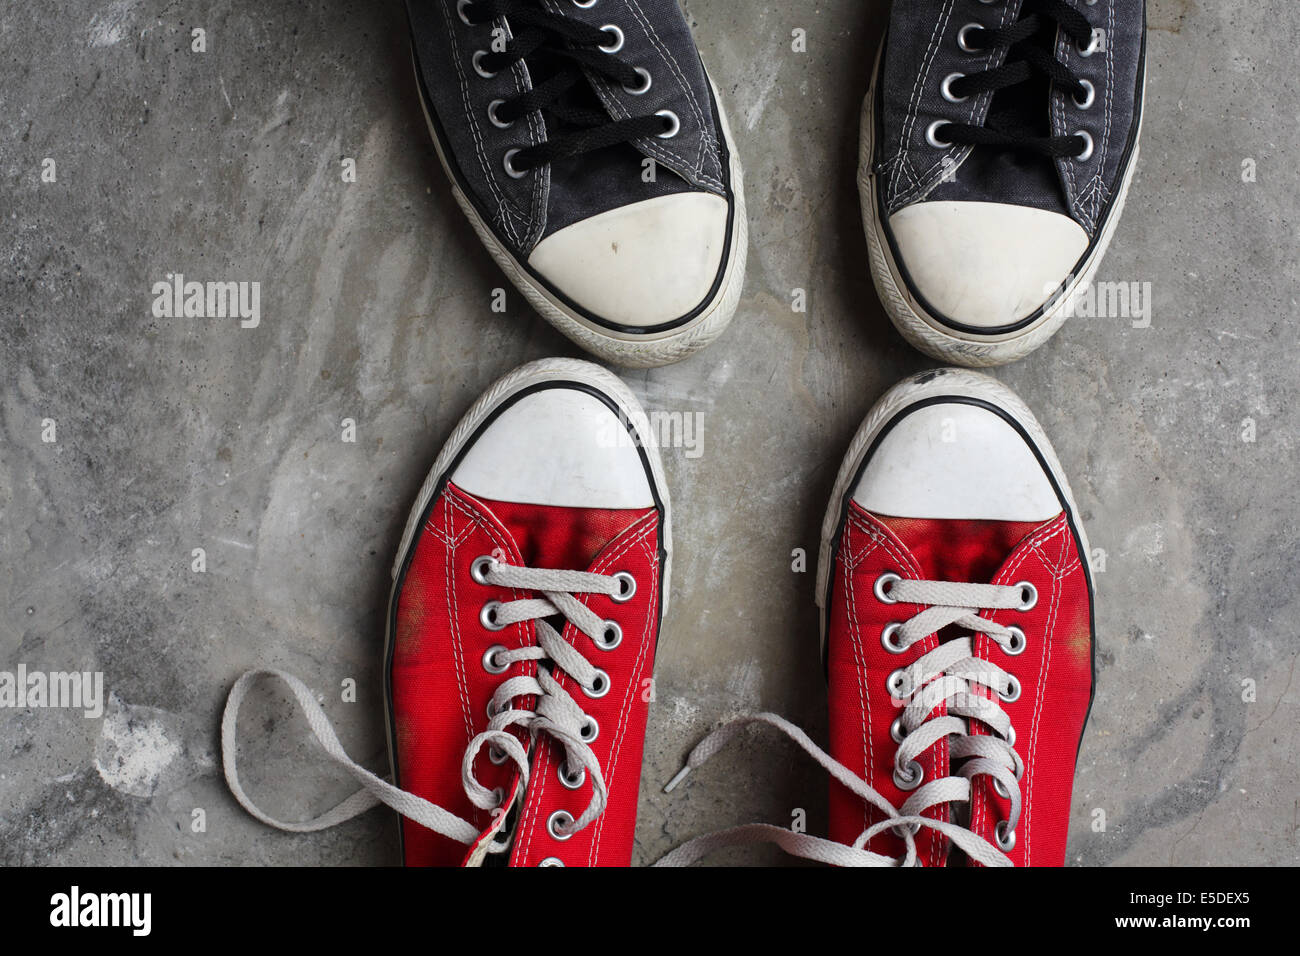 Two pairs of Converse shoes, toe to toe, shot against a concrete background  Stock Photo - Alamy